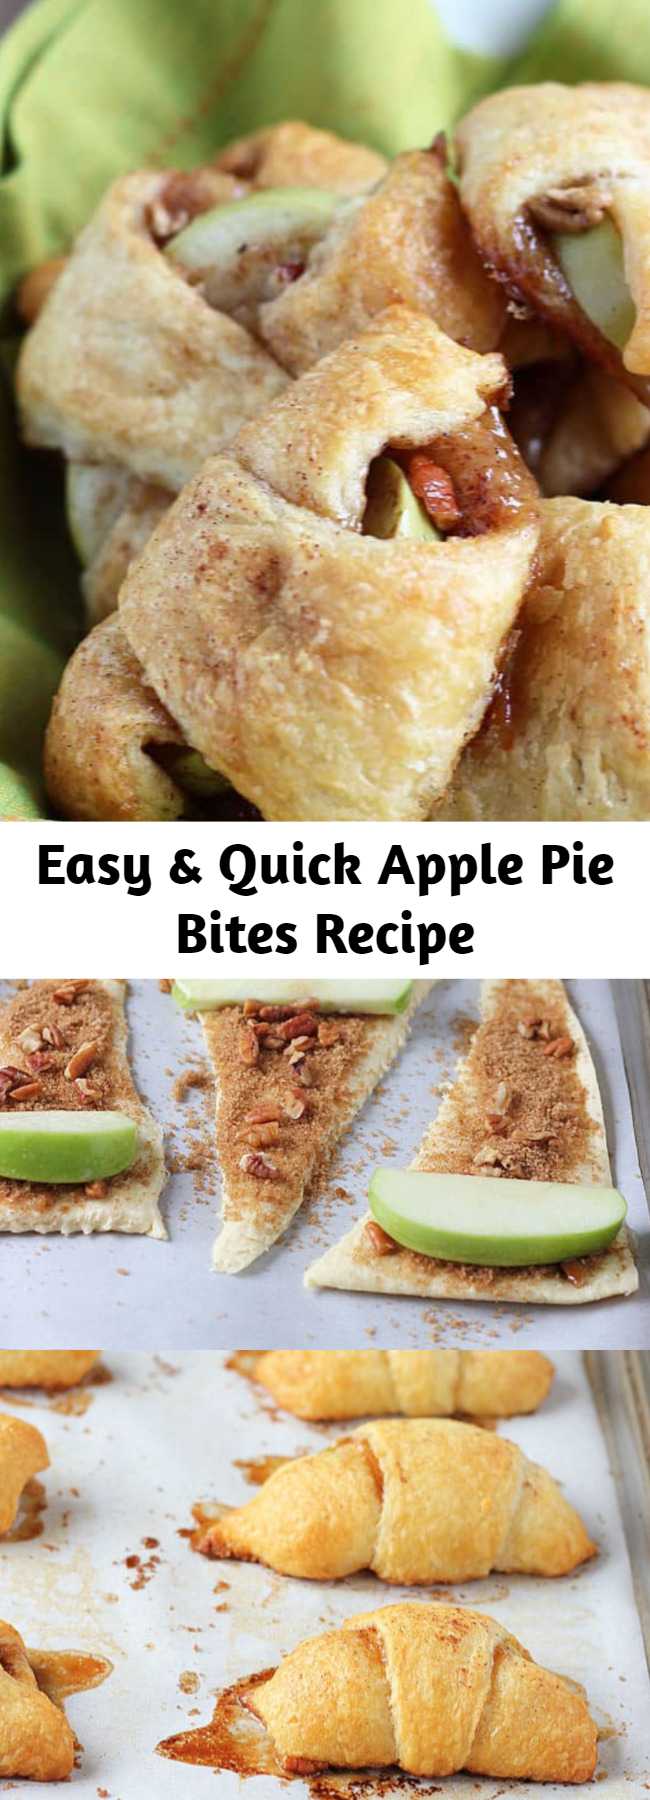 Easy & Quick Apple Pie Bites Recipe - Delicious, quick and easy mini apple pies made with Pillsbury crescent rolls in less than 30 minutes! These incredibly delicious Apple Pie Bites are going to be your go-to apple dessert in a hurry! These taste better than apple pie!!